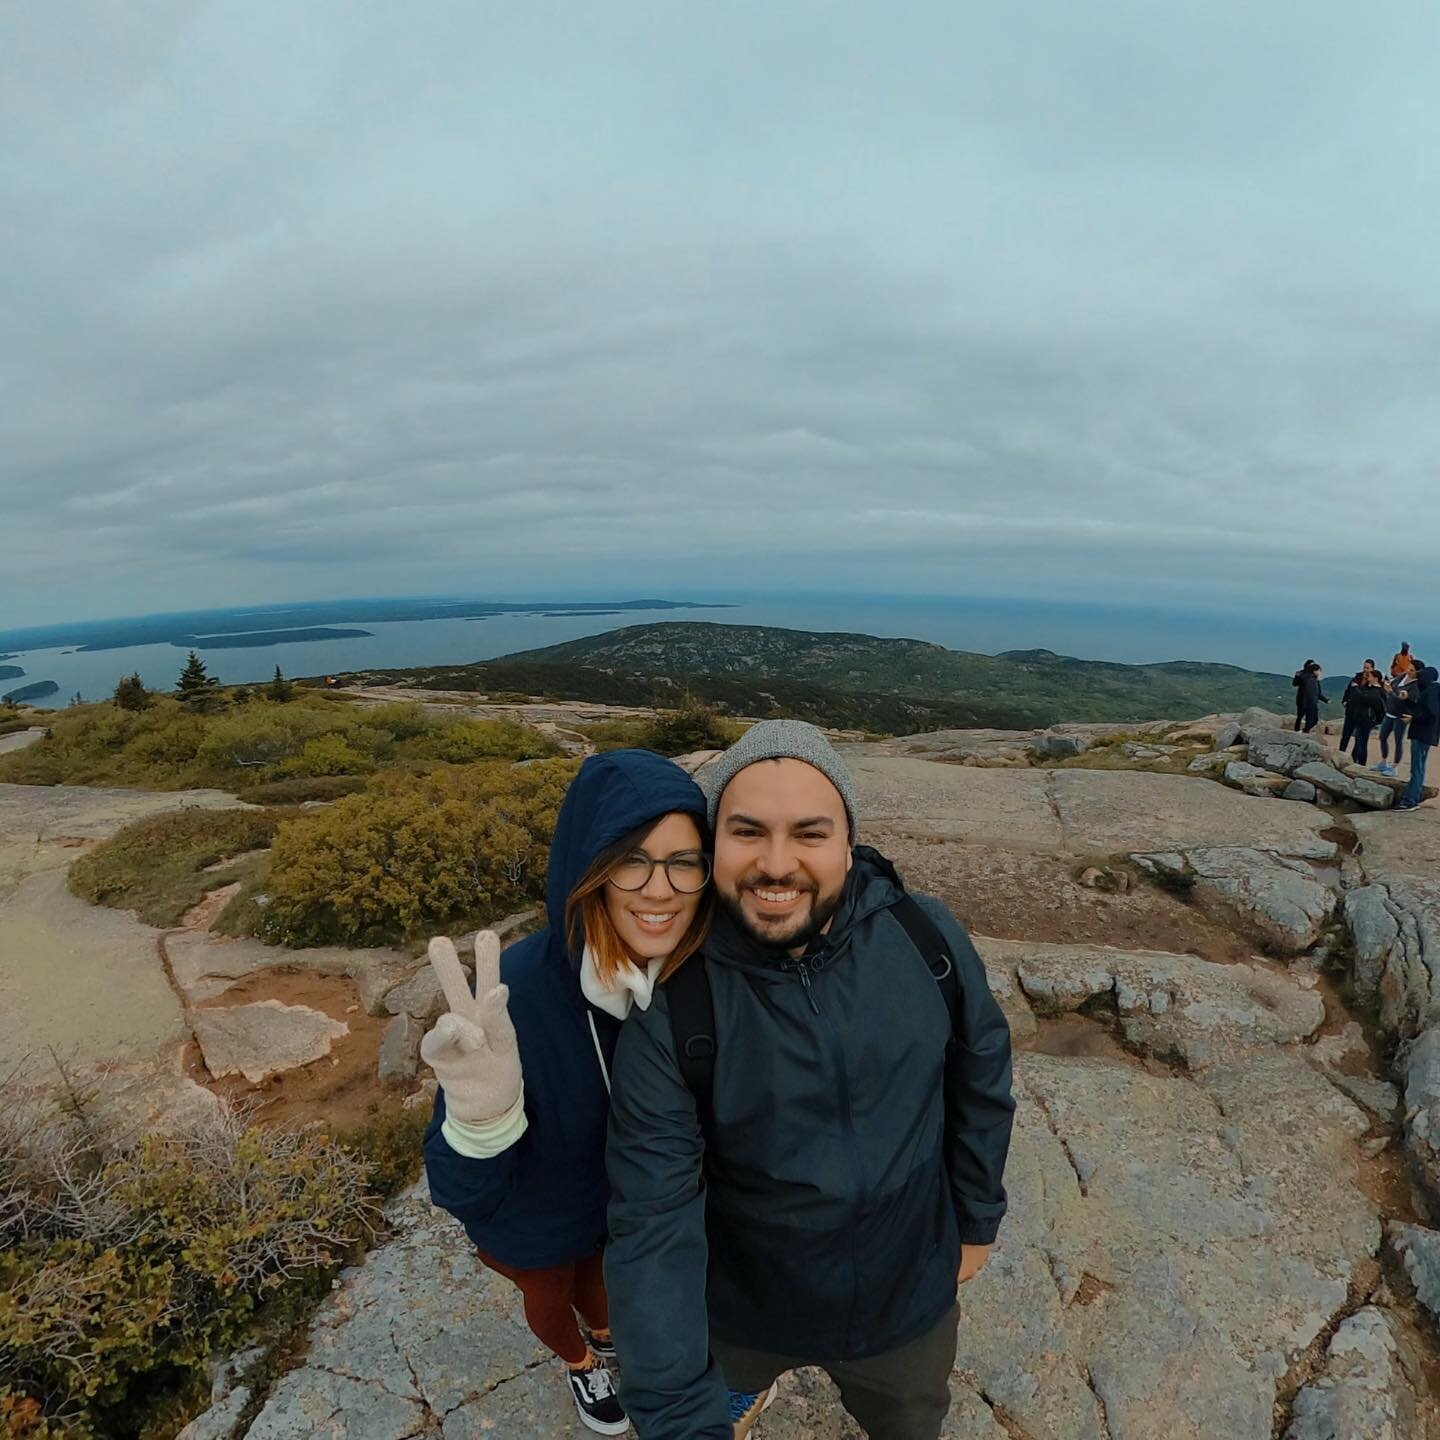 Happy birthday to the absolute best man I know. To know Alex is to love him. He is genuine, kind, invested, encouraging, thoughtful, and creative. He has an adventurous spirit (hence, here we are at the top of a maintain in Maine) and a servant&rsquo